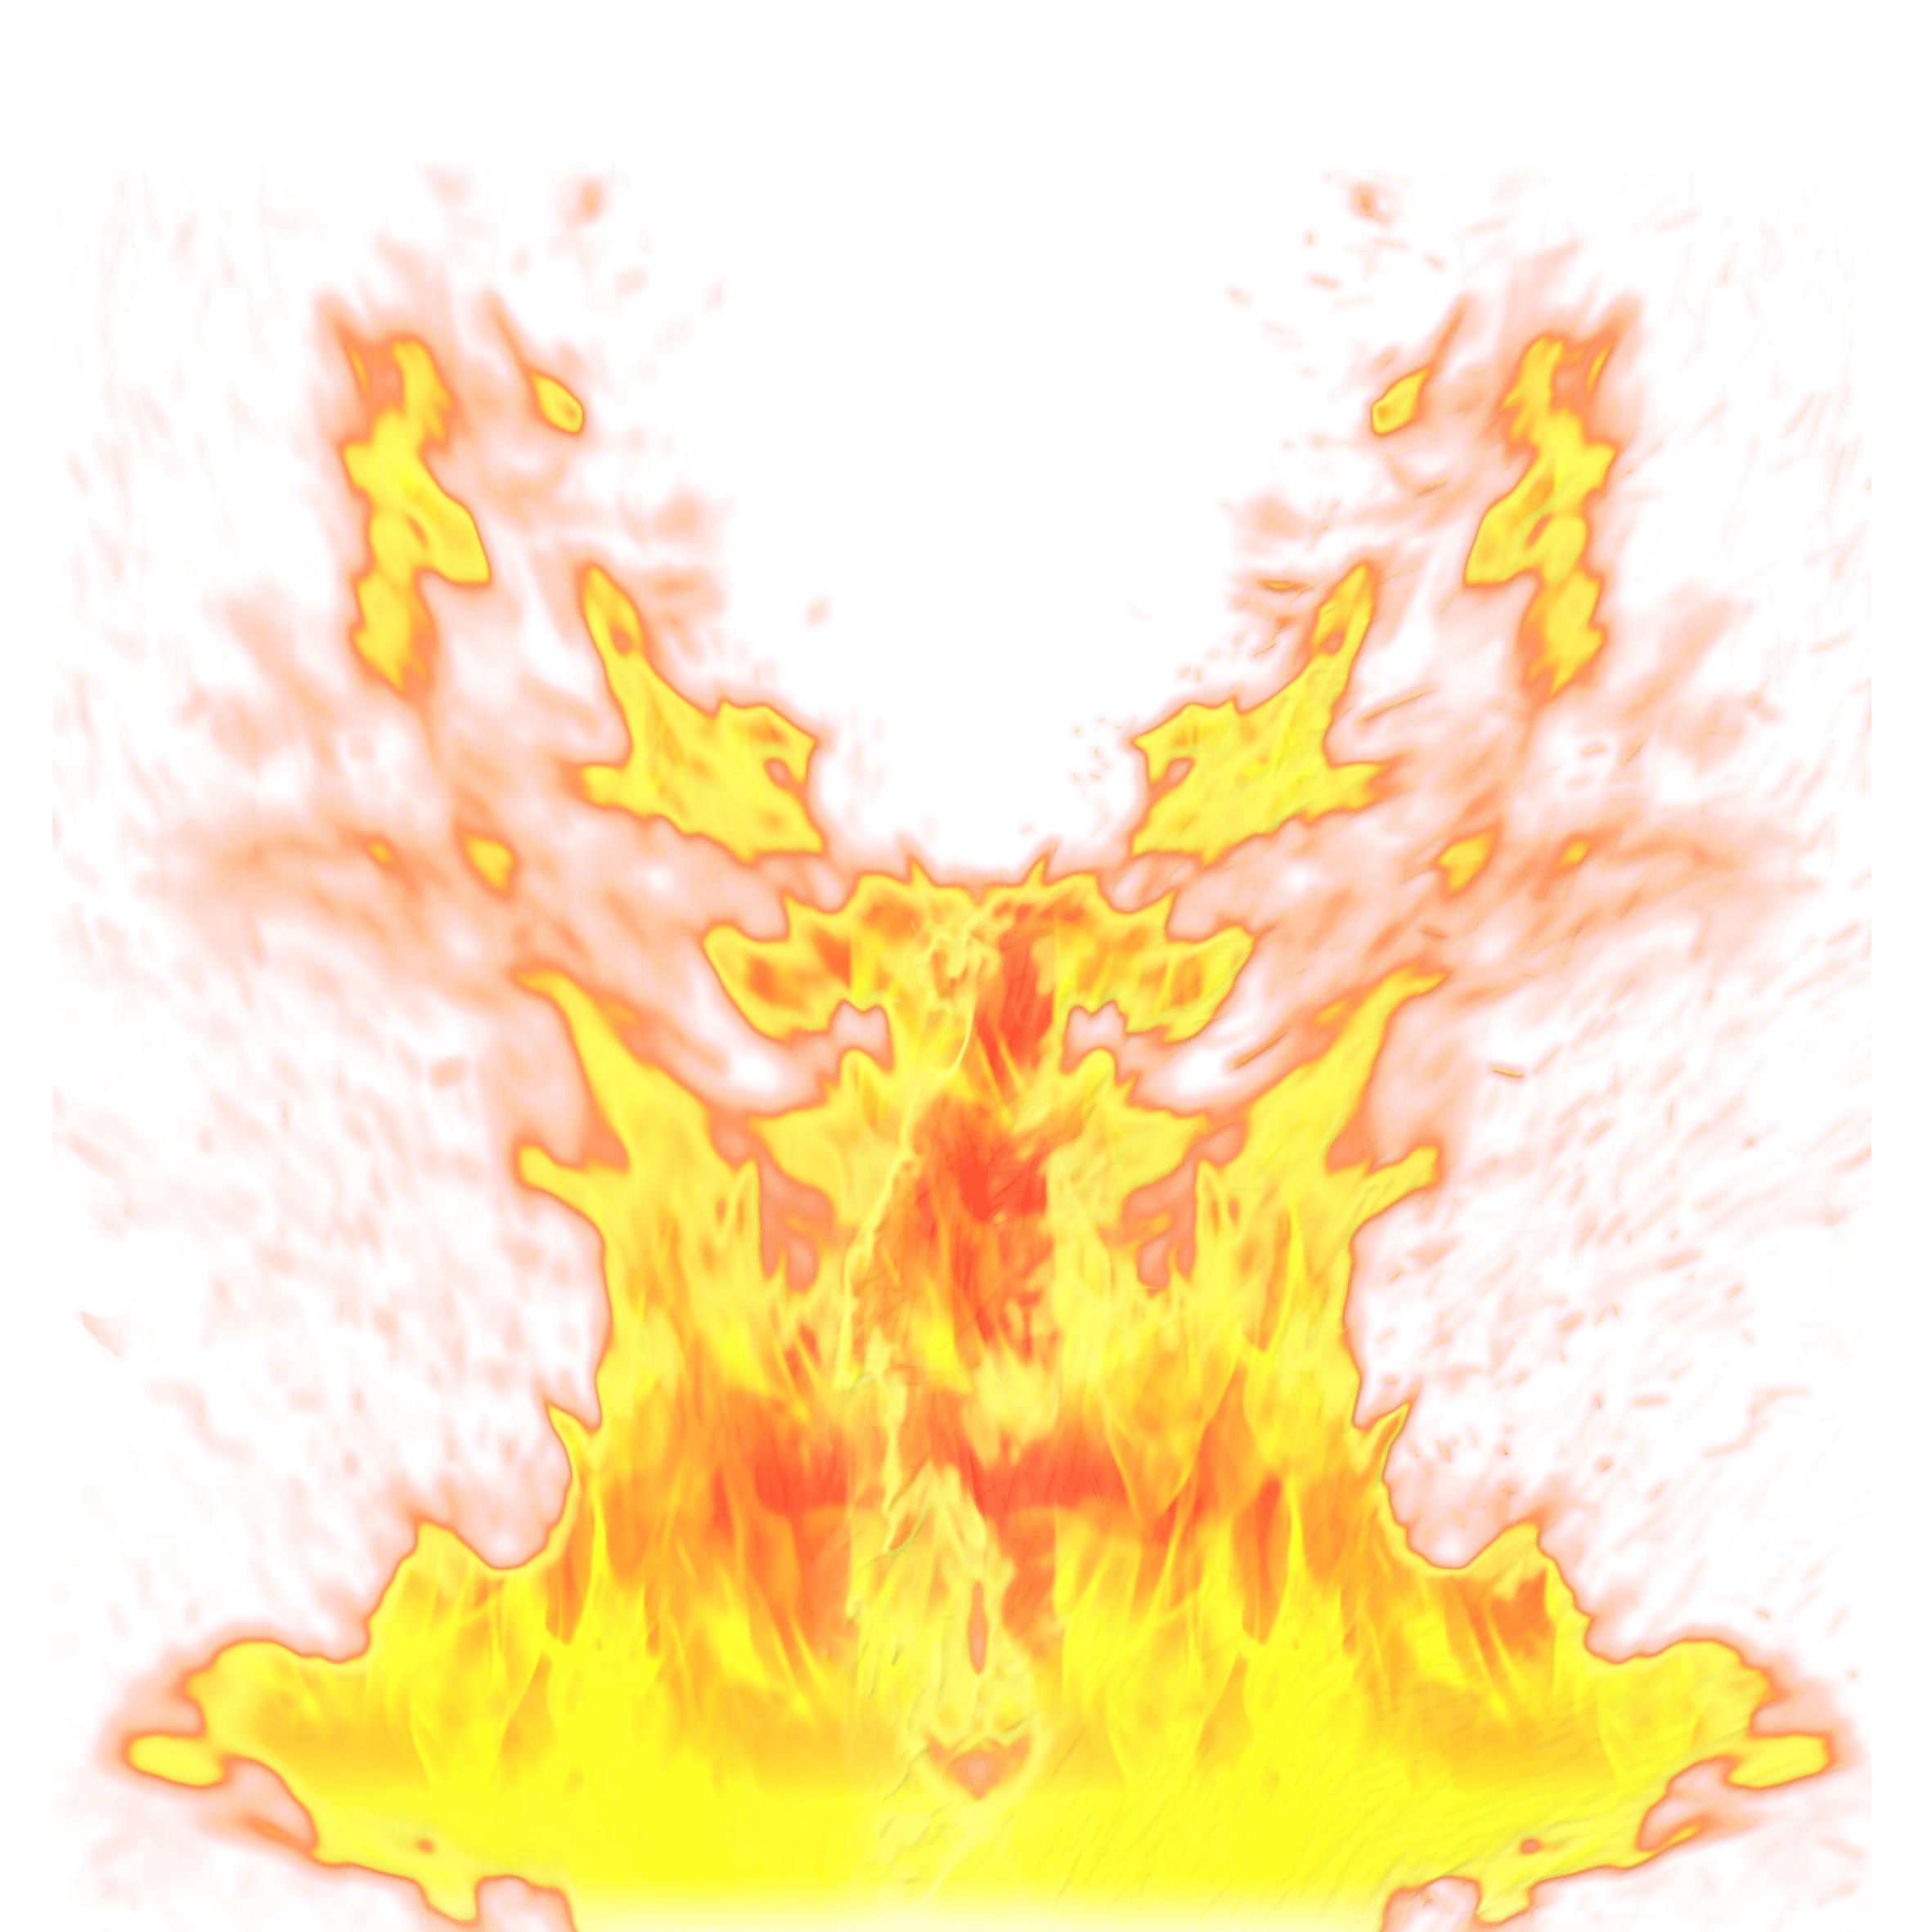 flame clipart large